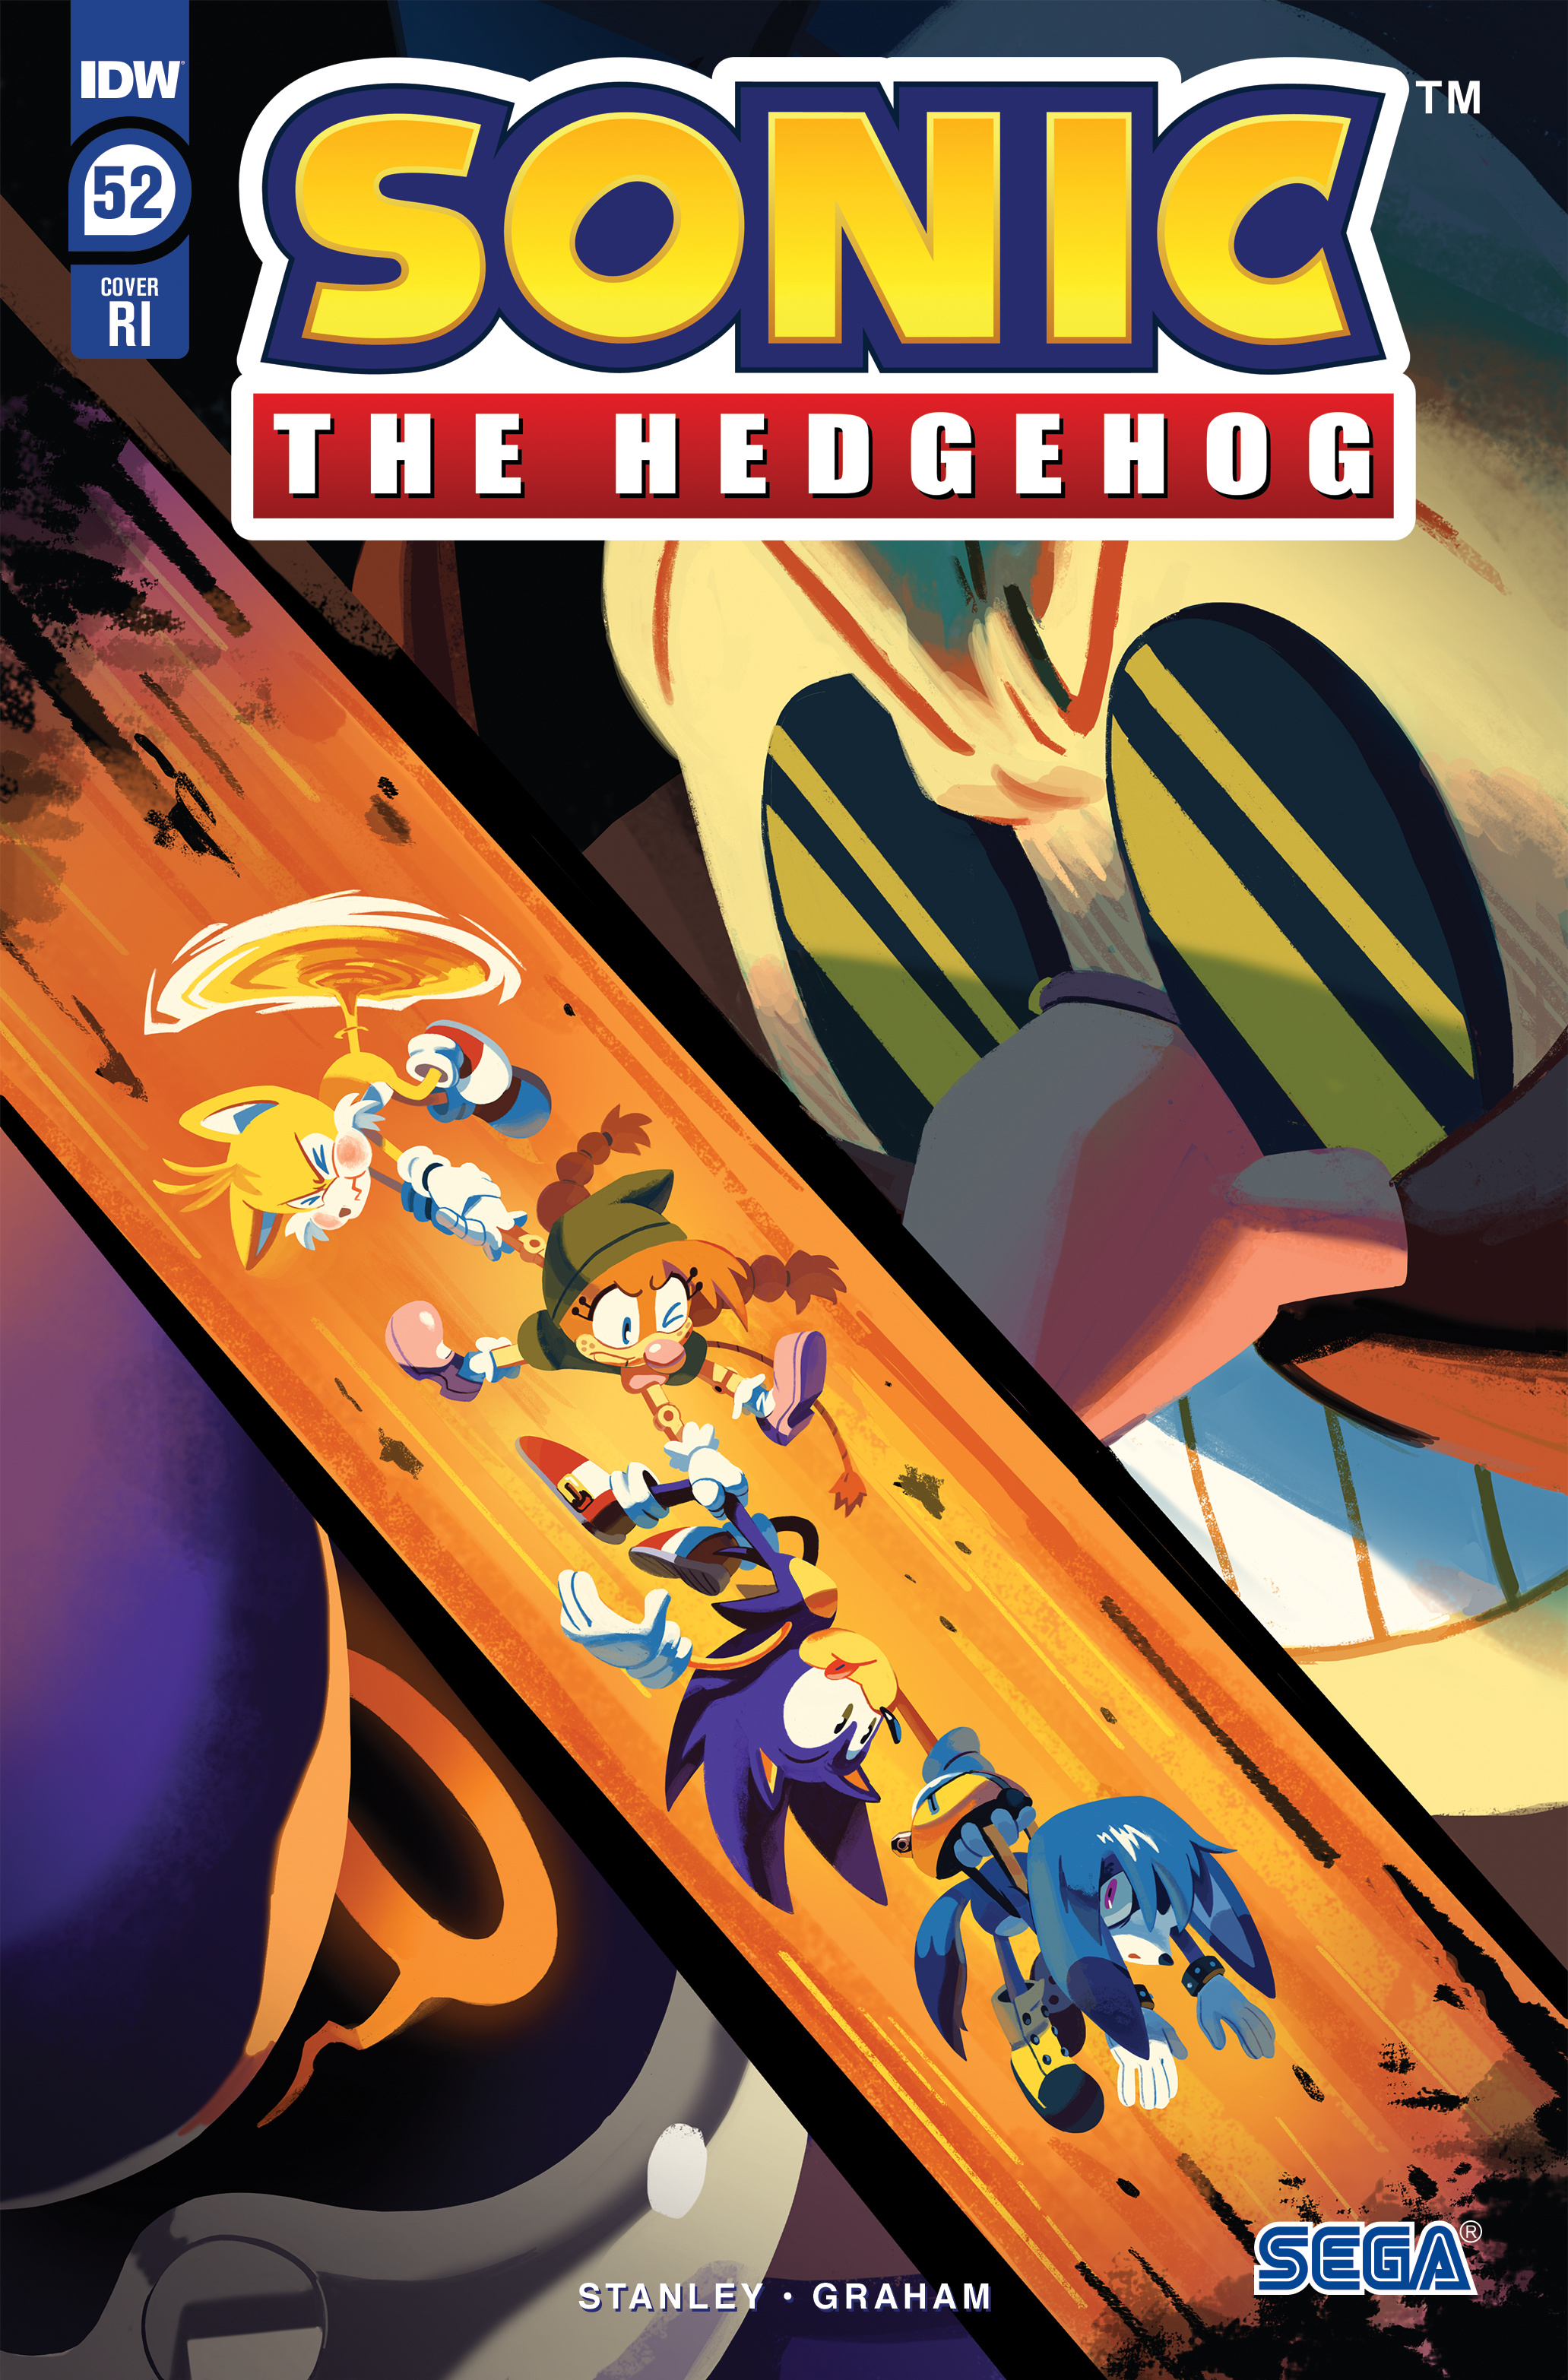 IDW Sonic Issue 52